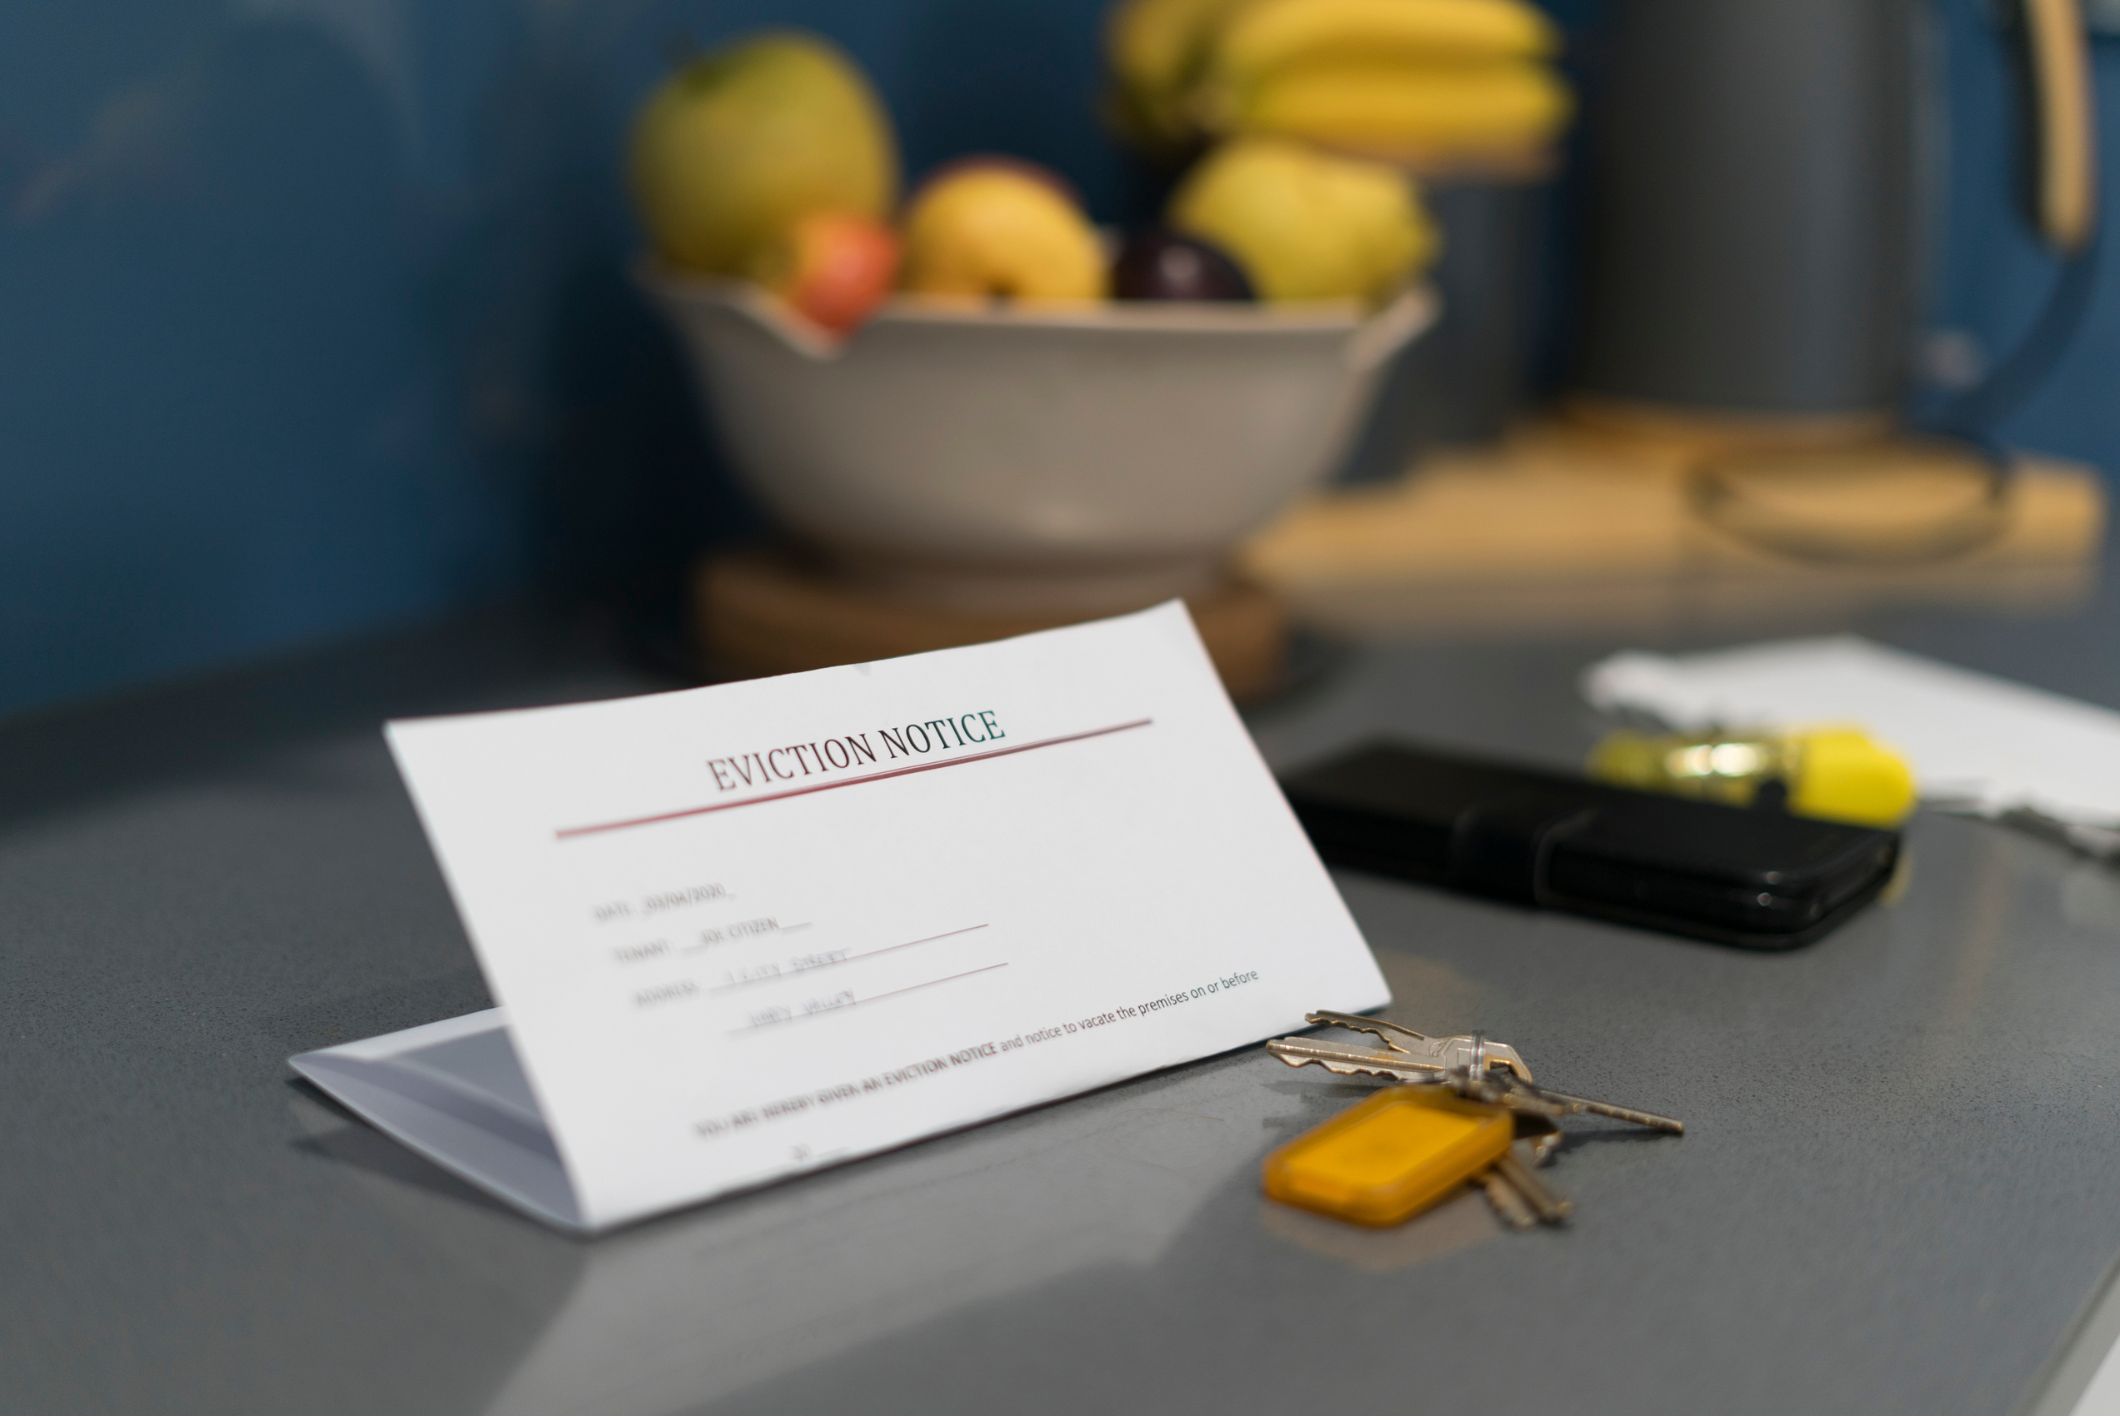 A folded letter lies on a grey table next to a set of keys. The letter reads 'eviction notice'.